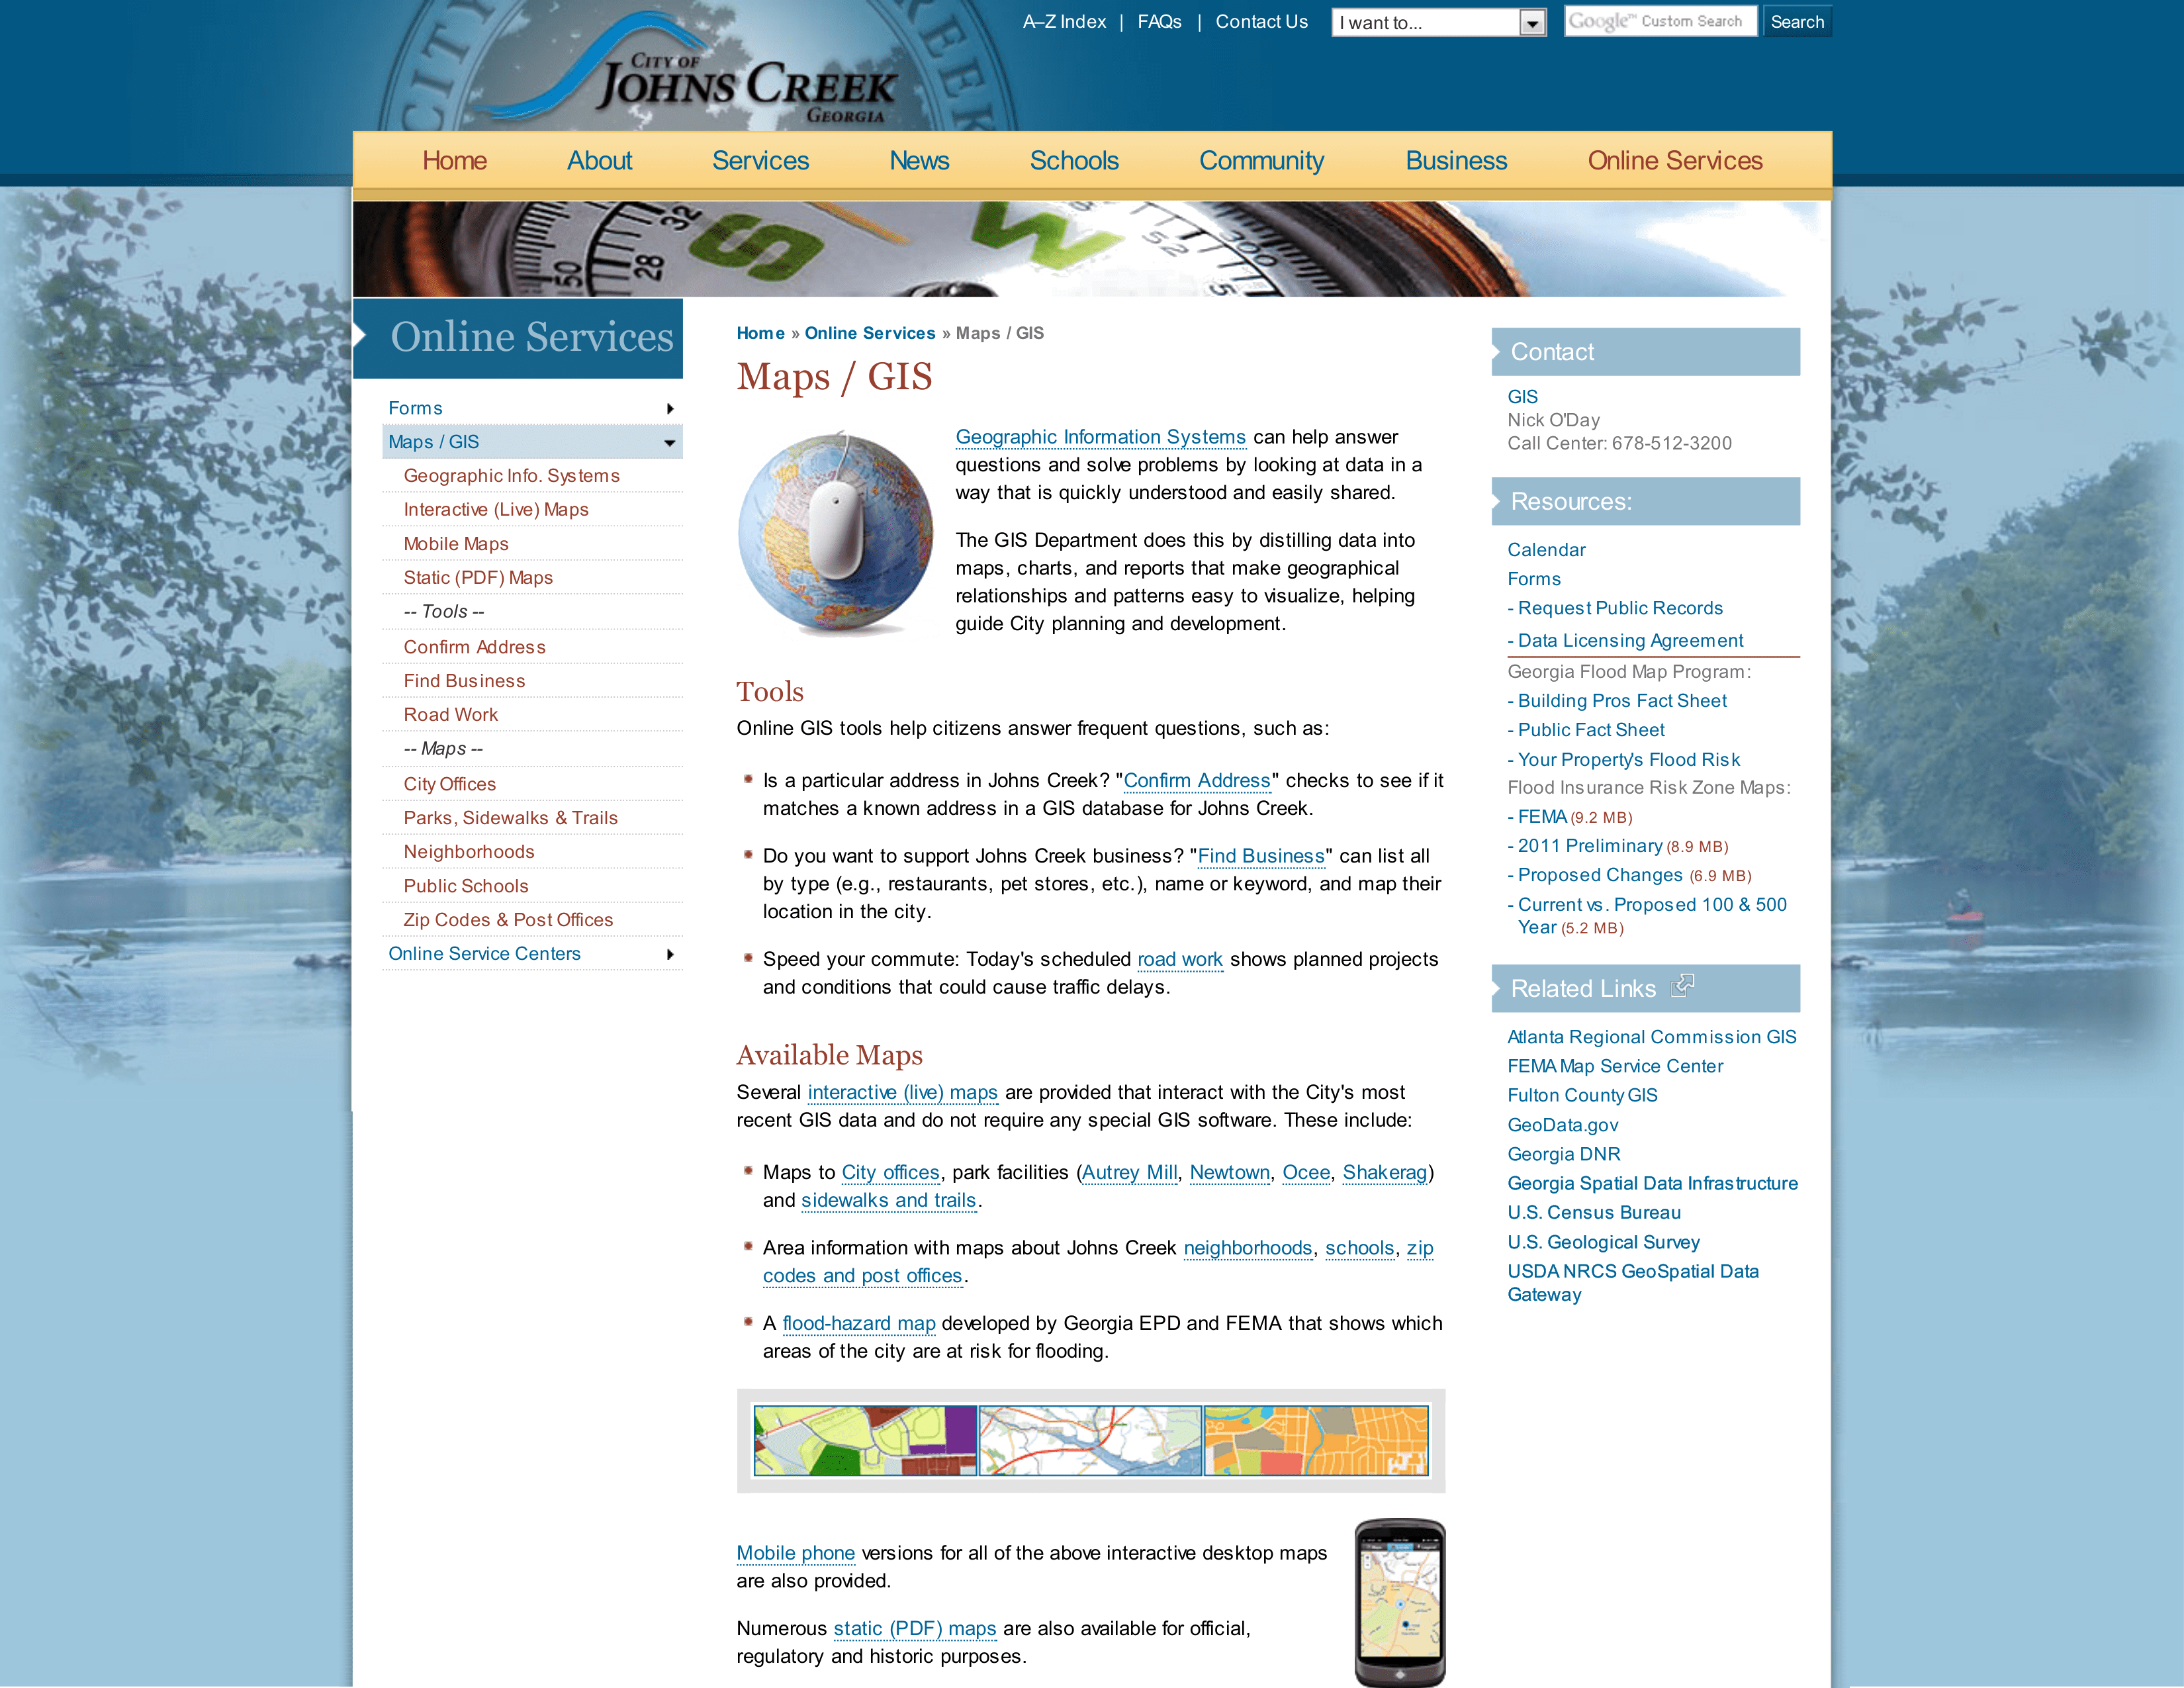 This is the GIS homepage in the City of Johns Creek, GA’s website describing to visitors what GIS is and the web tools available to users.